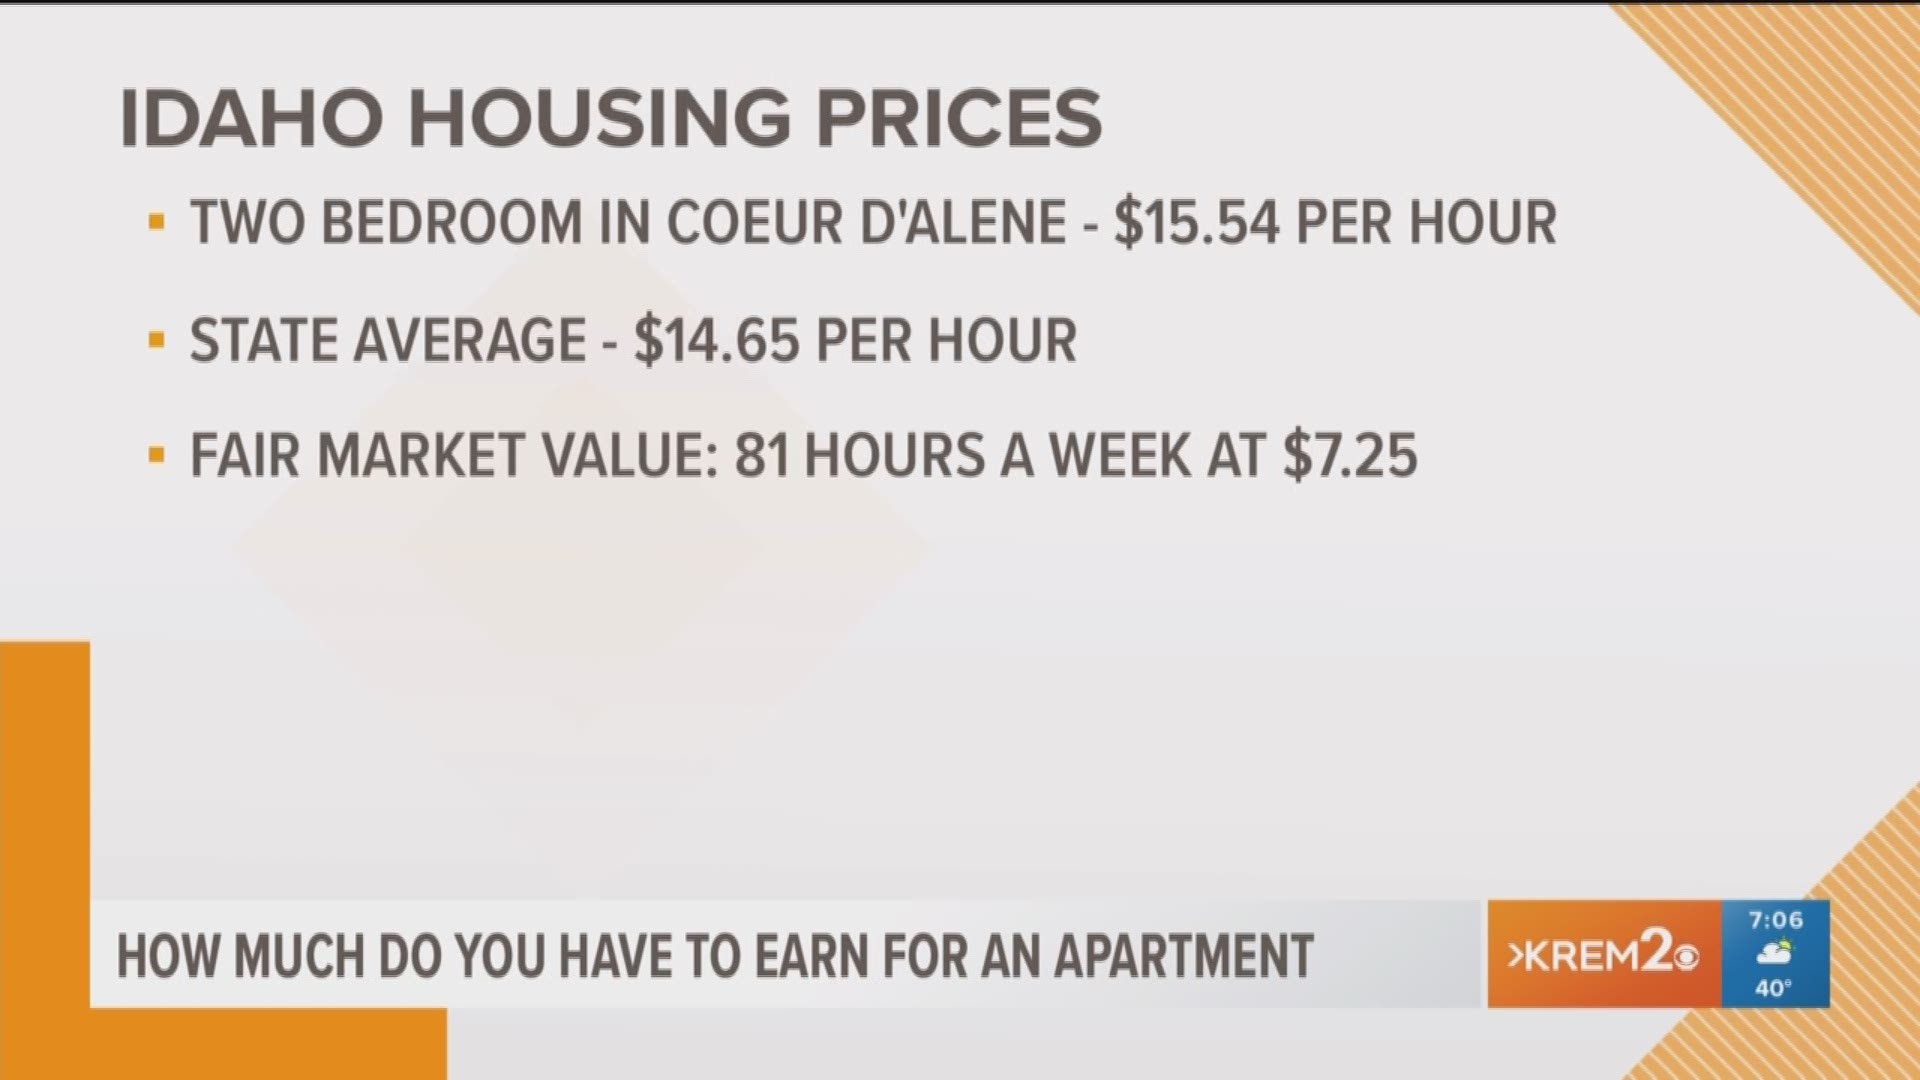 How much do you have to earn for an apartment in Washington, Idaho